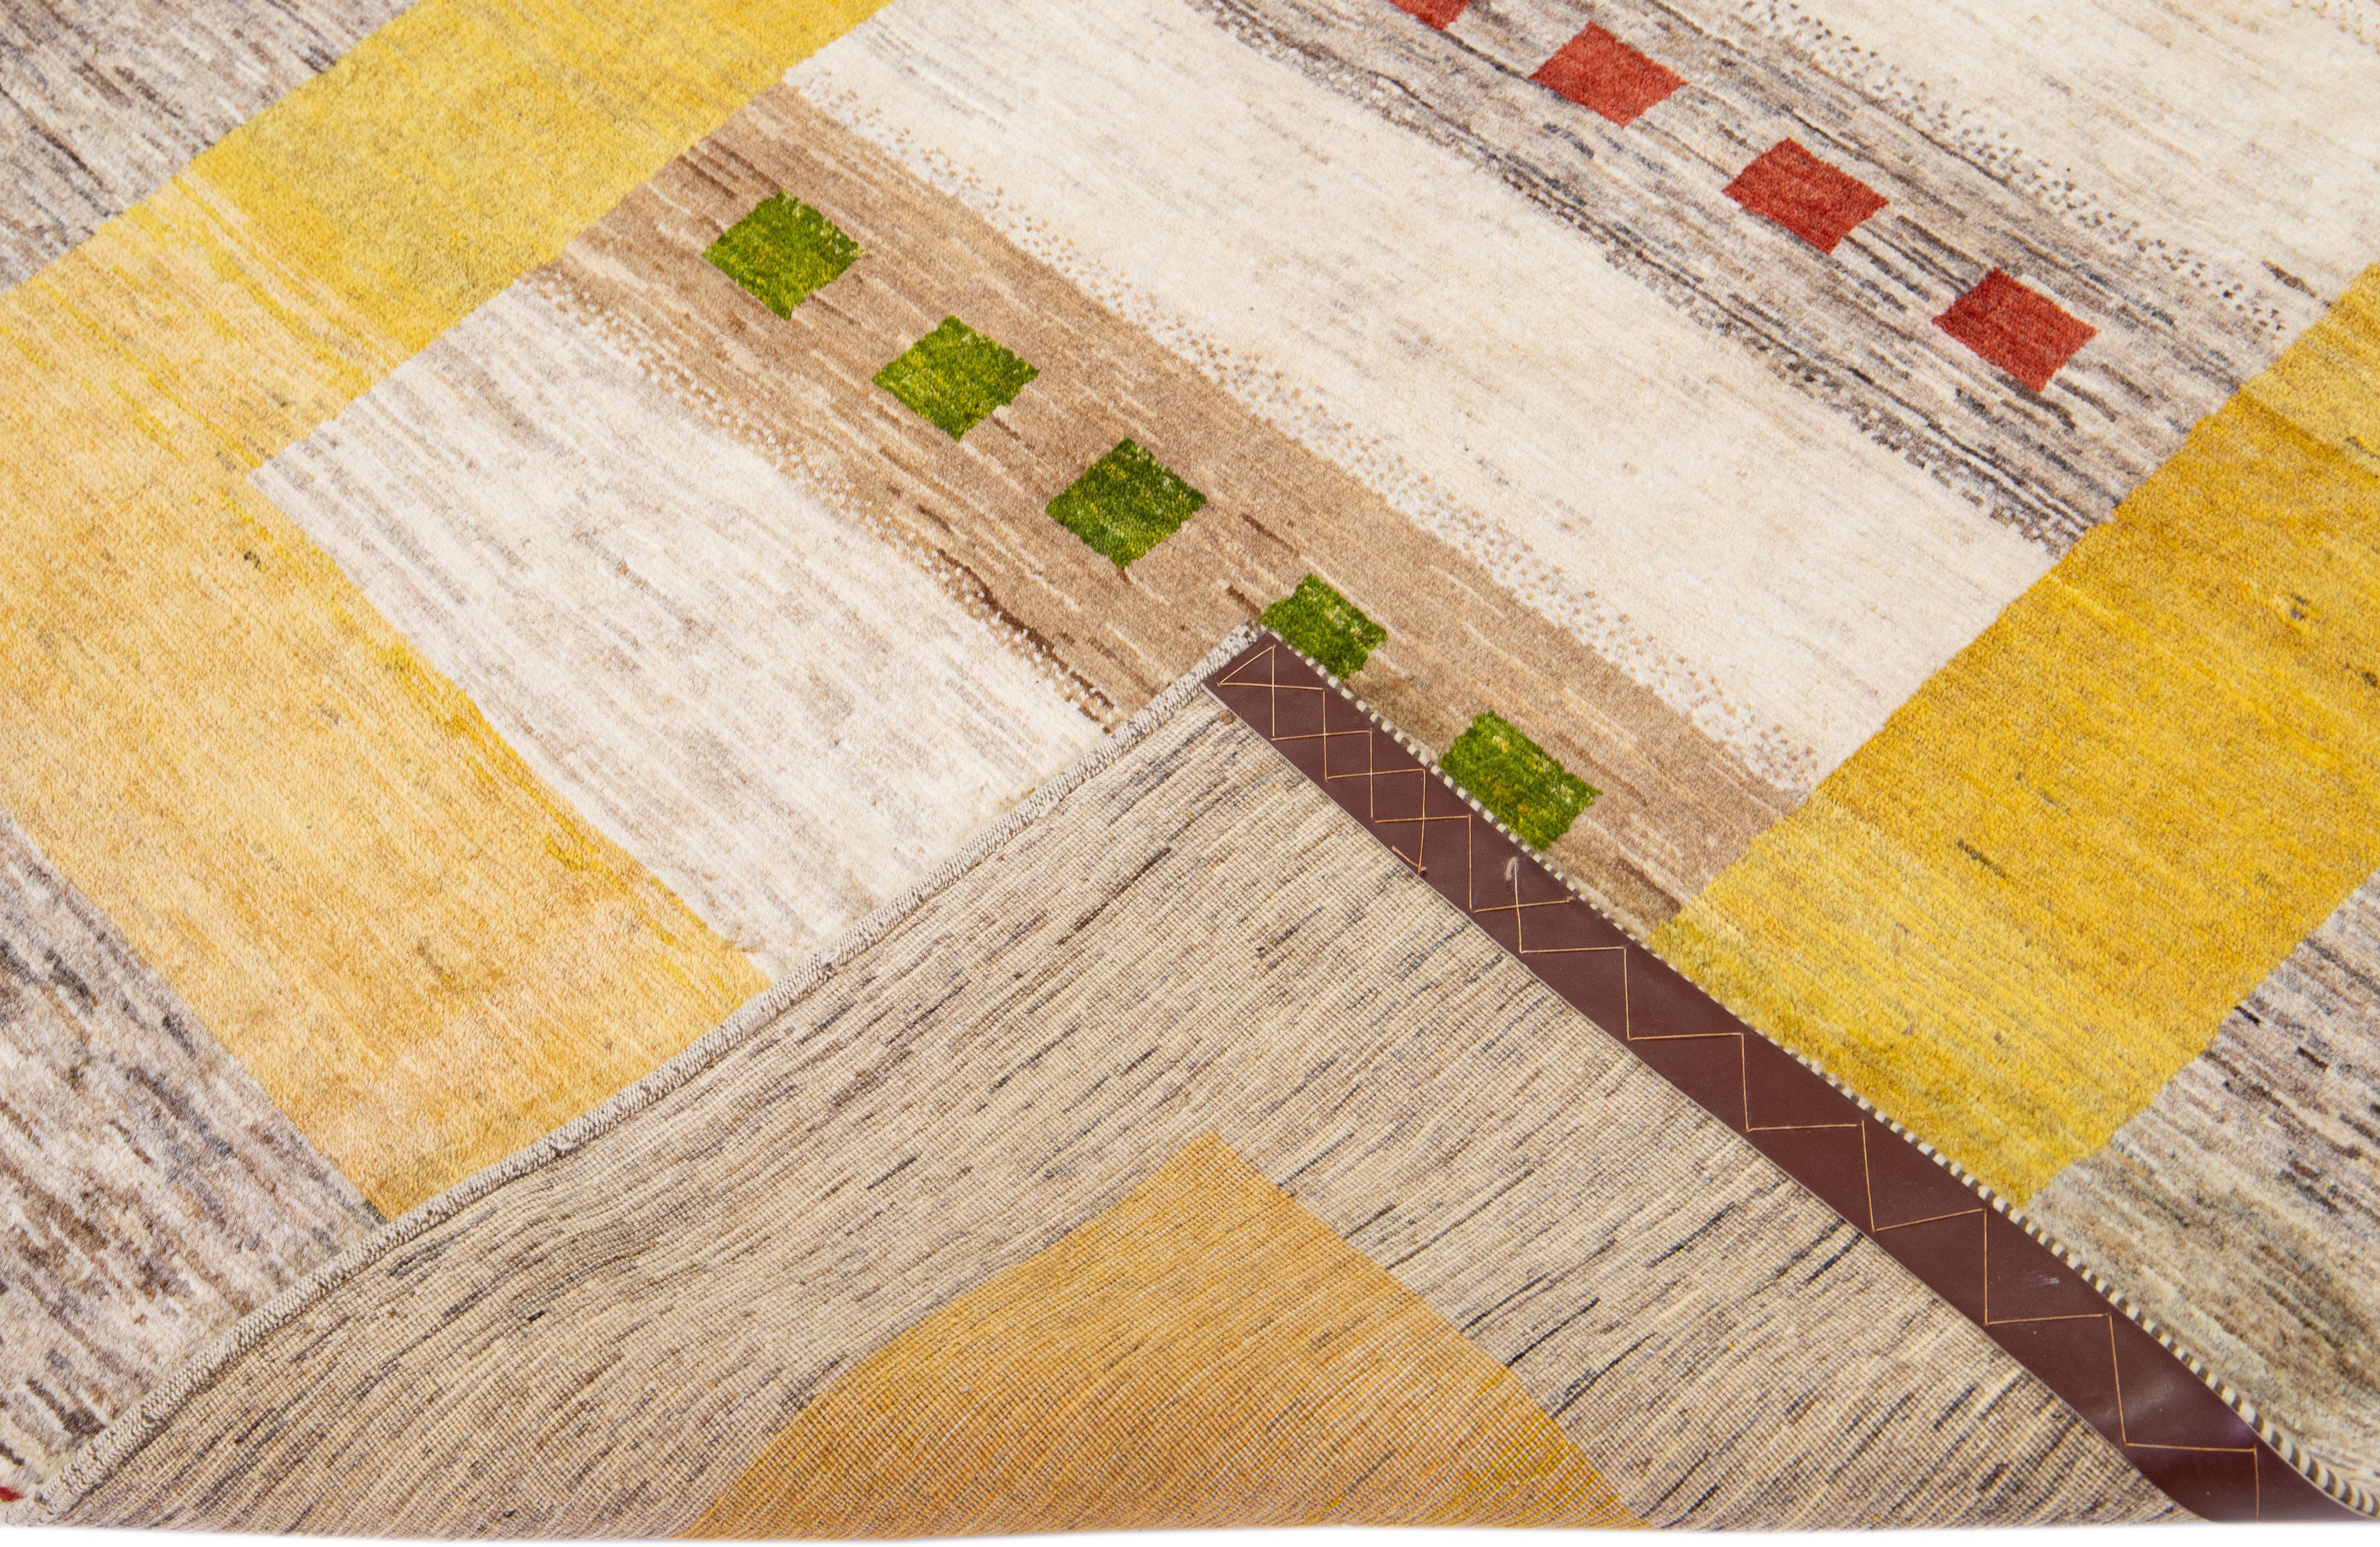 Beautiful modern Gabbeh hand-knotted wool rug with a brown and yellow field. This Persian rug has green, red, and beige accents in a gorgeous geometric design.

This rug measures: 4'9